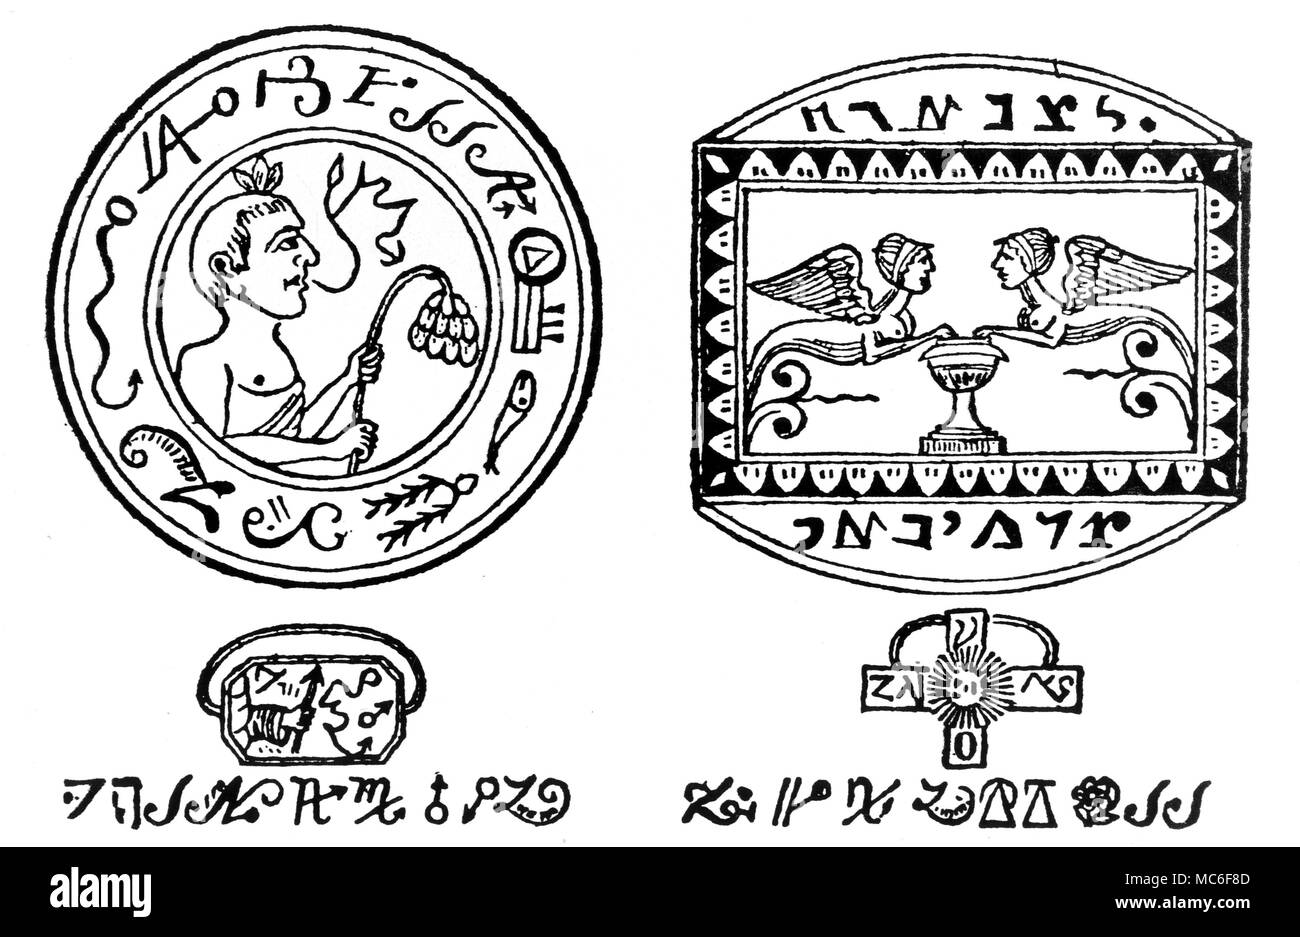 Diagrams of ring-gem designs from the grimoire tradition. These designs are from the manuscript known as the 'Sage of the Pyramids'. That to the left will cause earthquakes, stars to fall from the heavens, storms, and general destruction. That to the right will command genies to any work the magician desires. Stock Photo